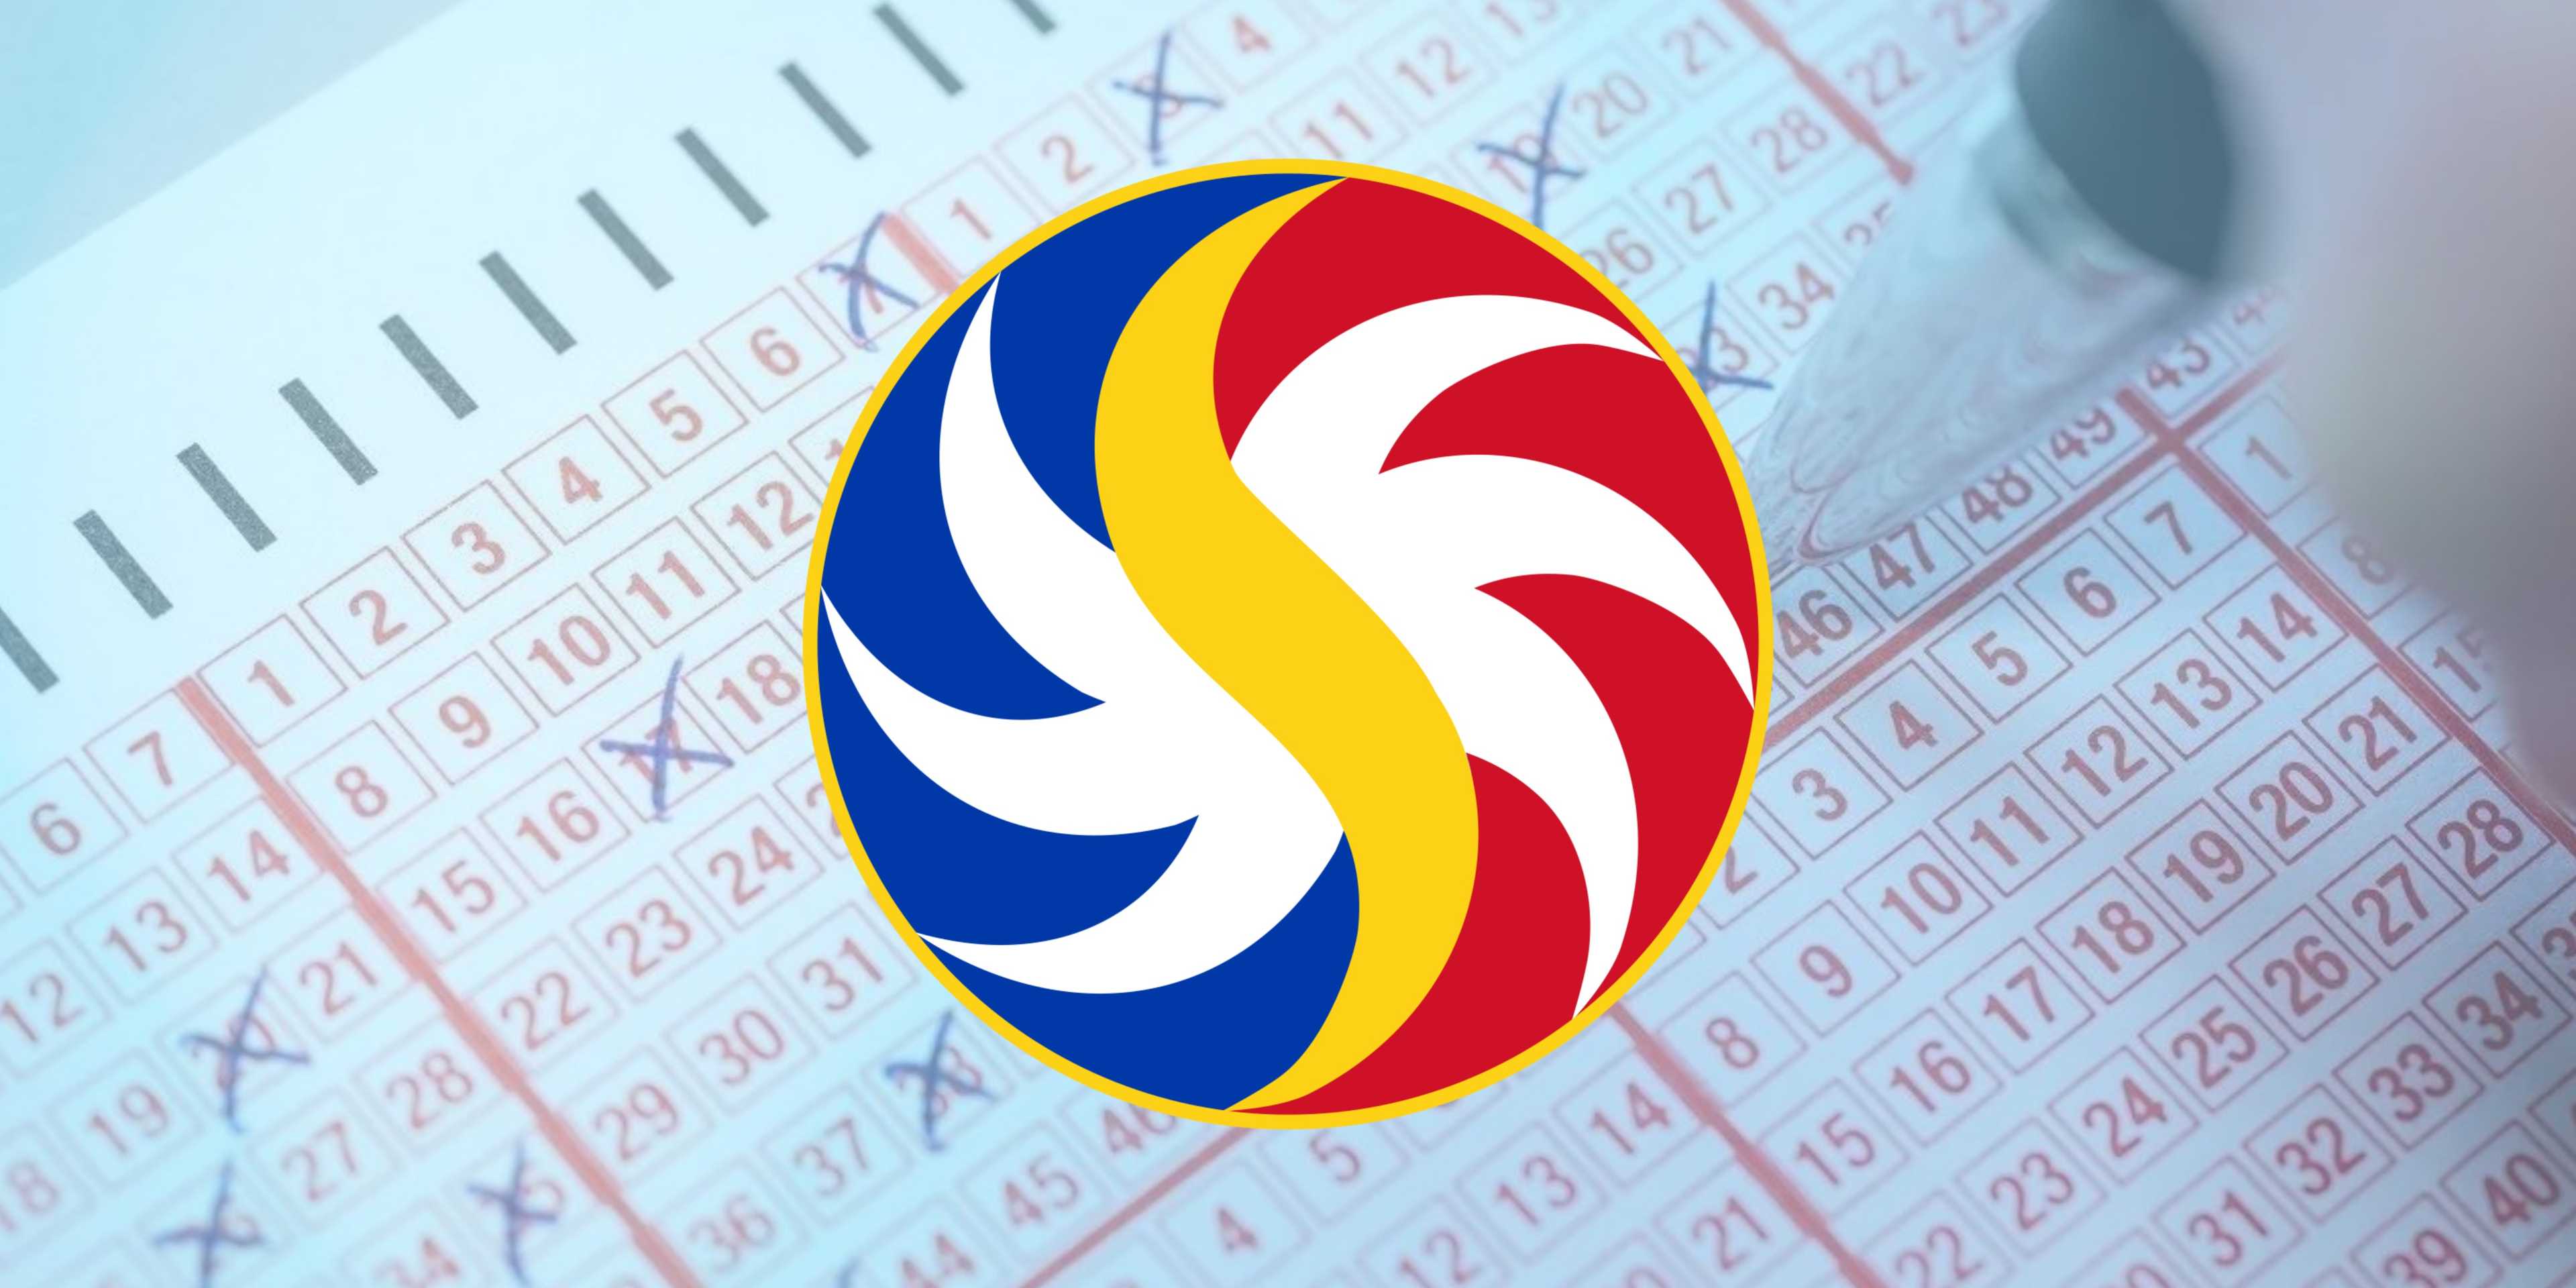 PCSO Lotto Draw Results on Thursday, March 14